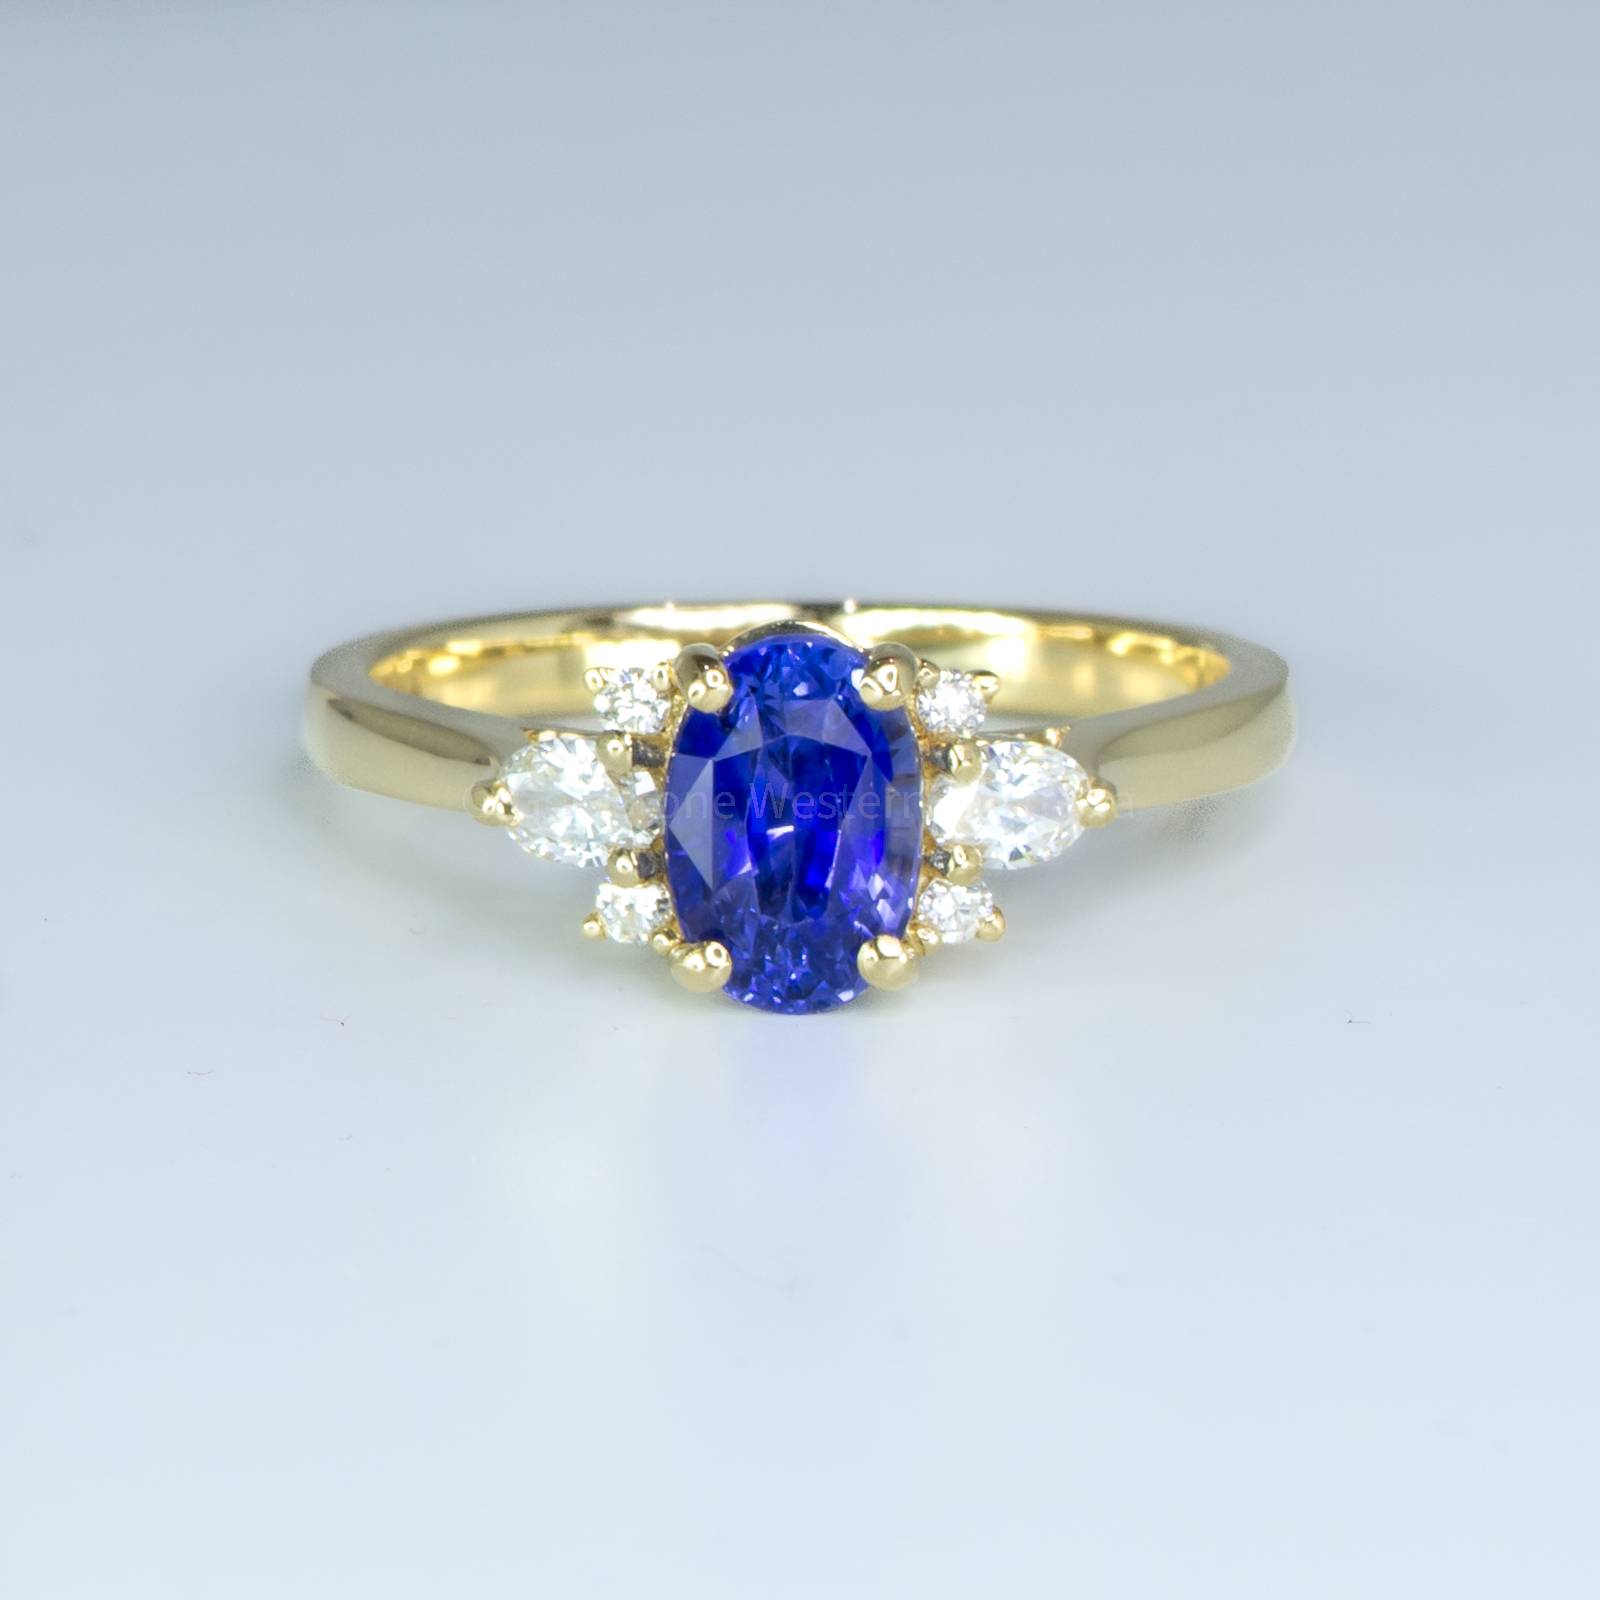 Buy 1.89ct Natural Blue Sapphire and Diamond Ring